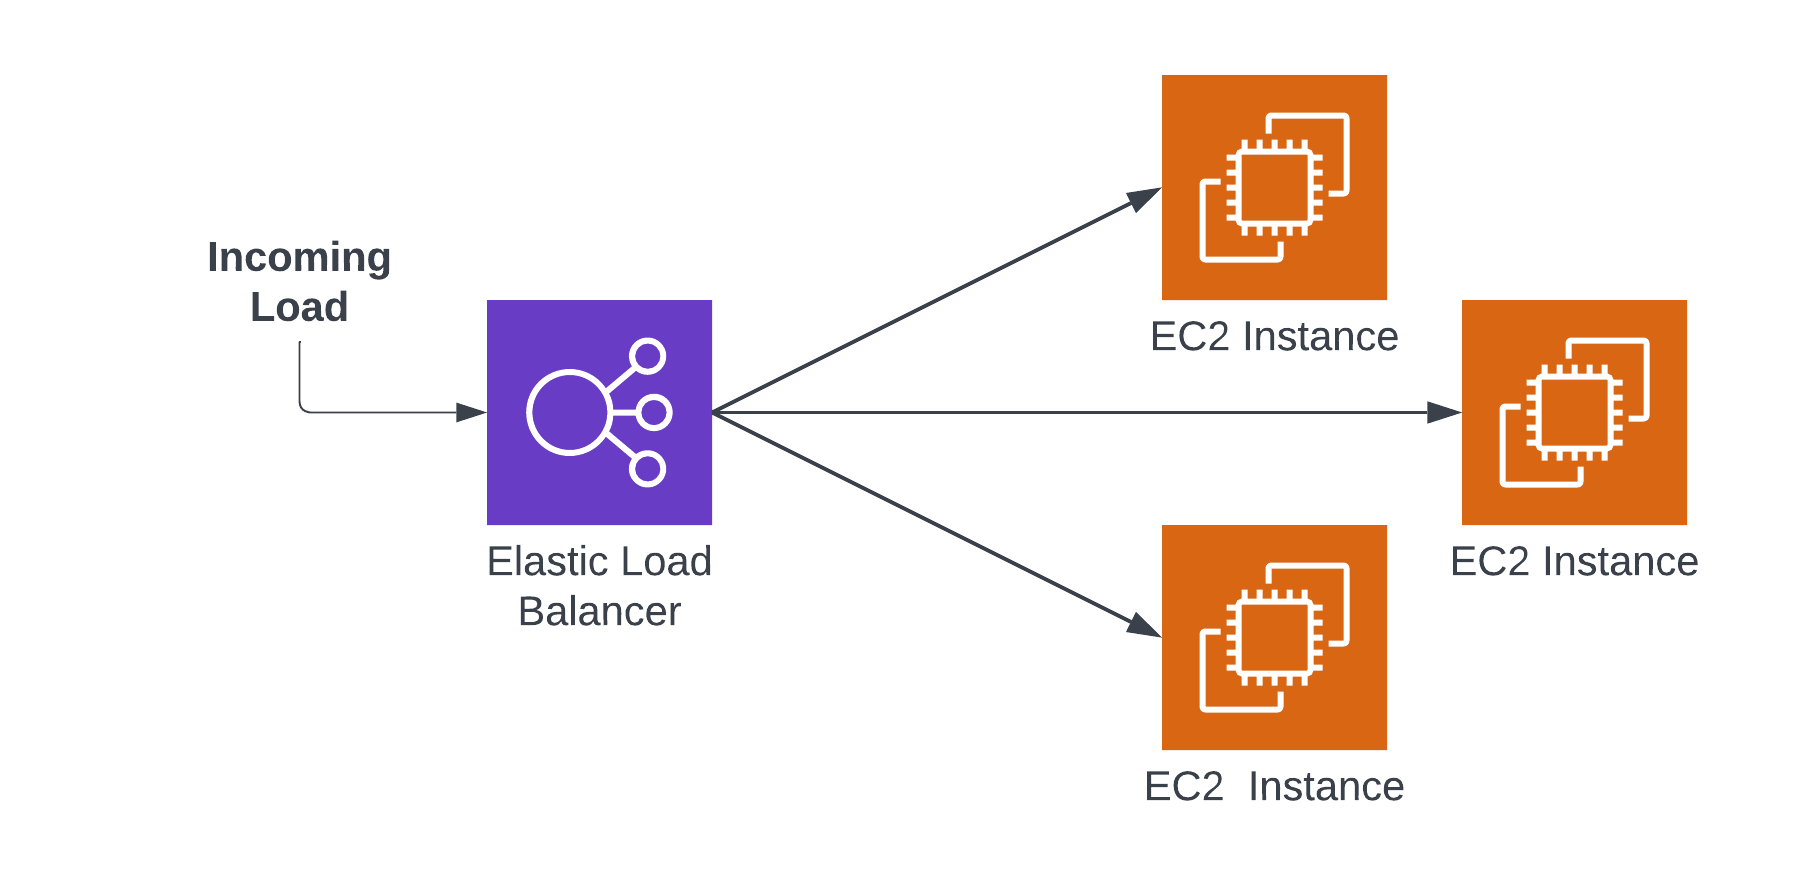 An image showing an AWS Elastic Load Balancer routing a load to 3 EC2 instances